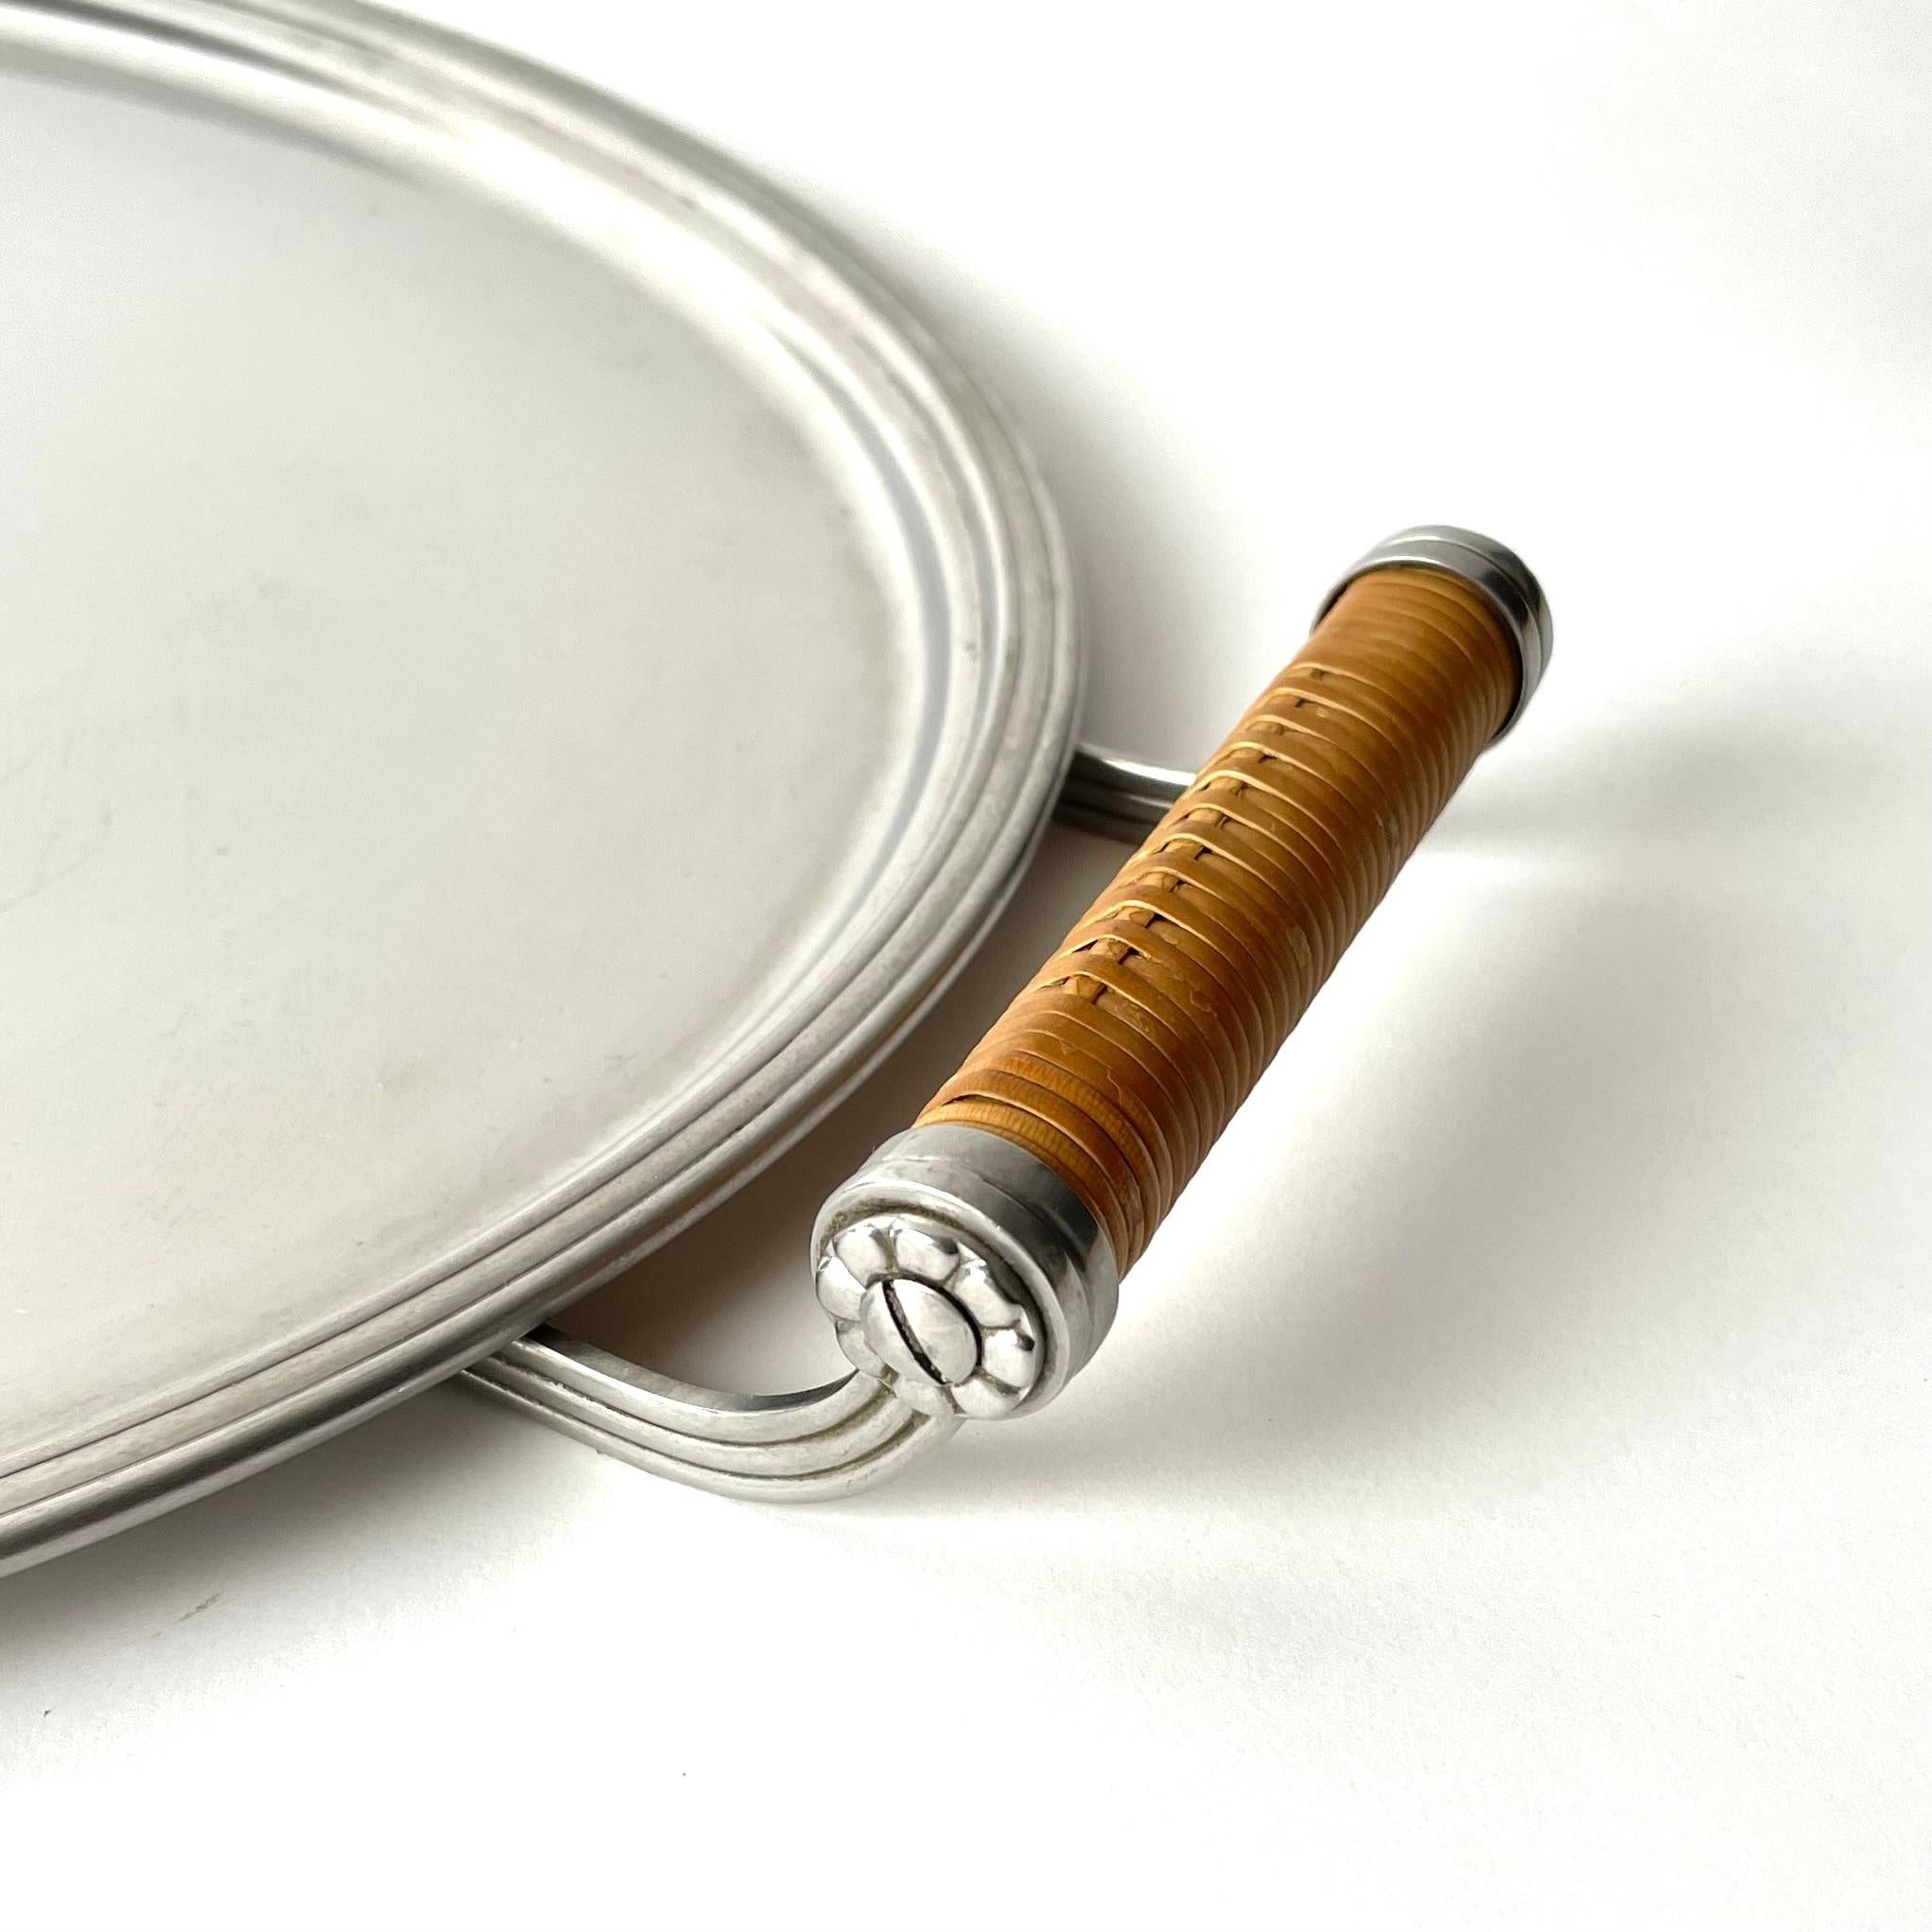 Stainless Steel Serving Tray with Rattan-Wrapped Handles. 
Made in Sweden during the 1930s-1940s. Designed and produced by the famous Swedish company Gense, based in Eskilstuna, Sweden. Gense was one of the leading producer of elegant and